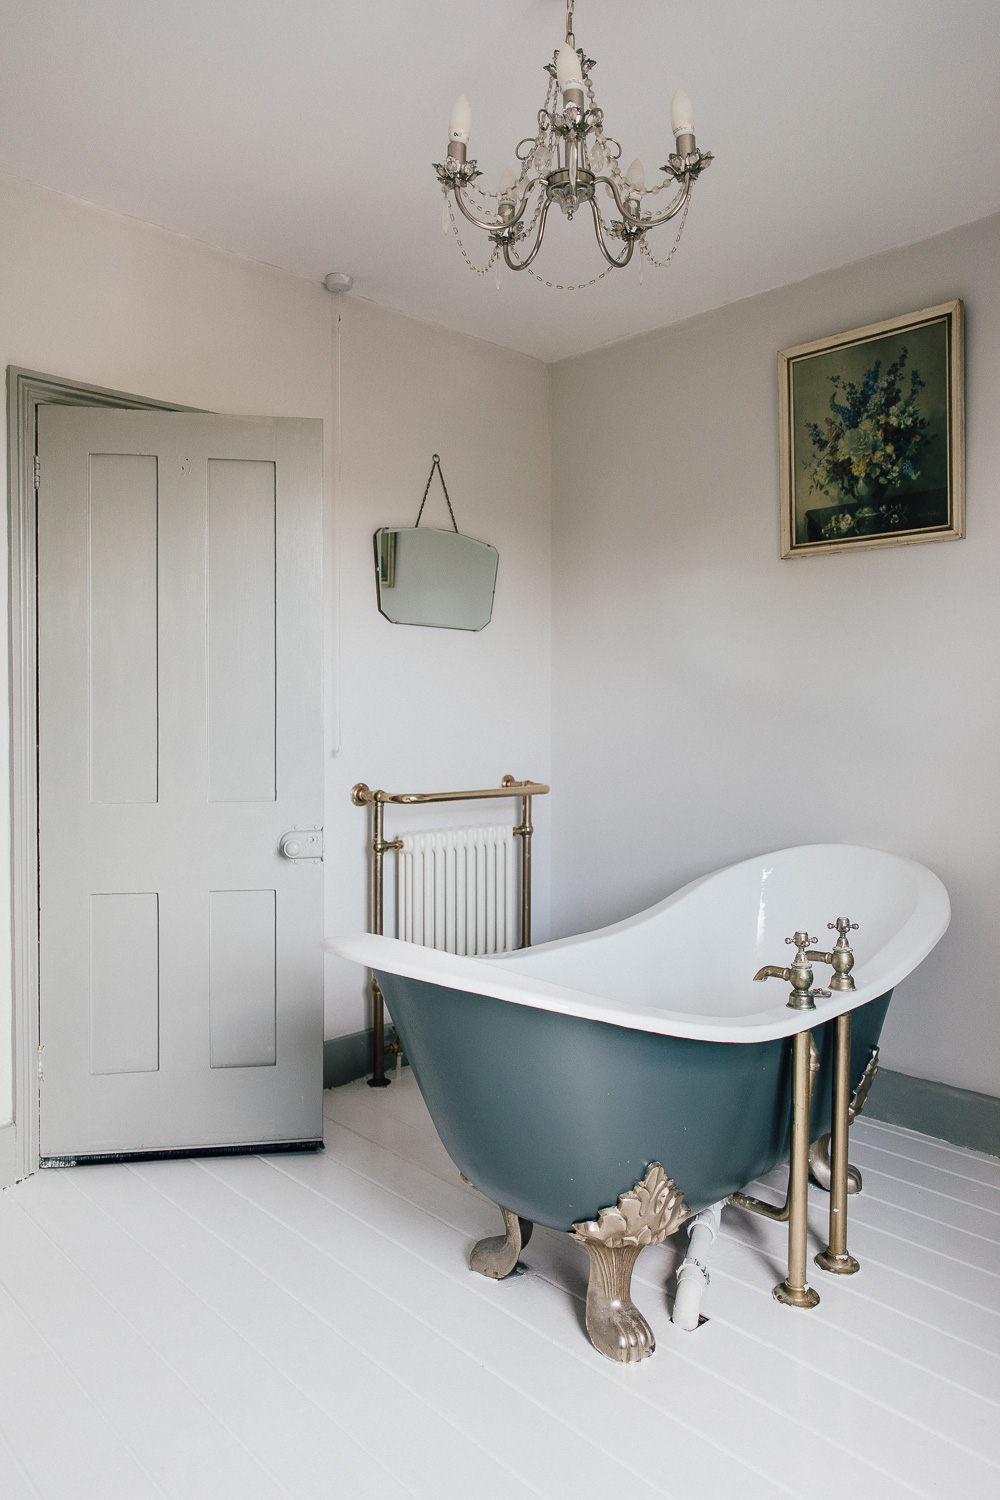 Slipper bath painted in Down Pipe